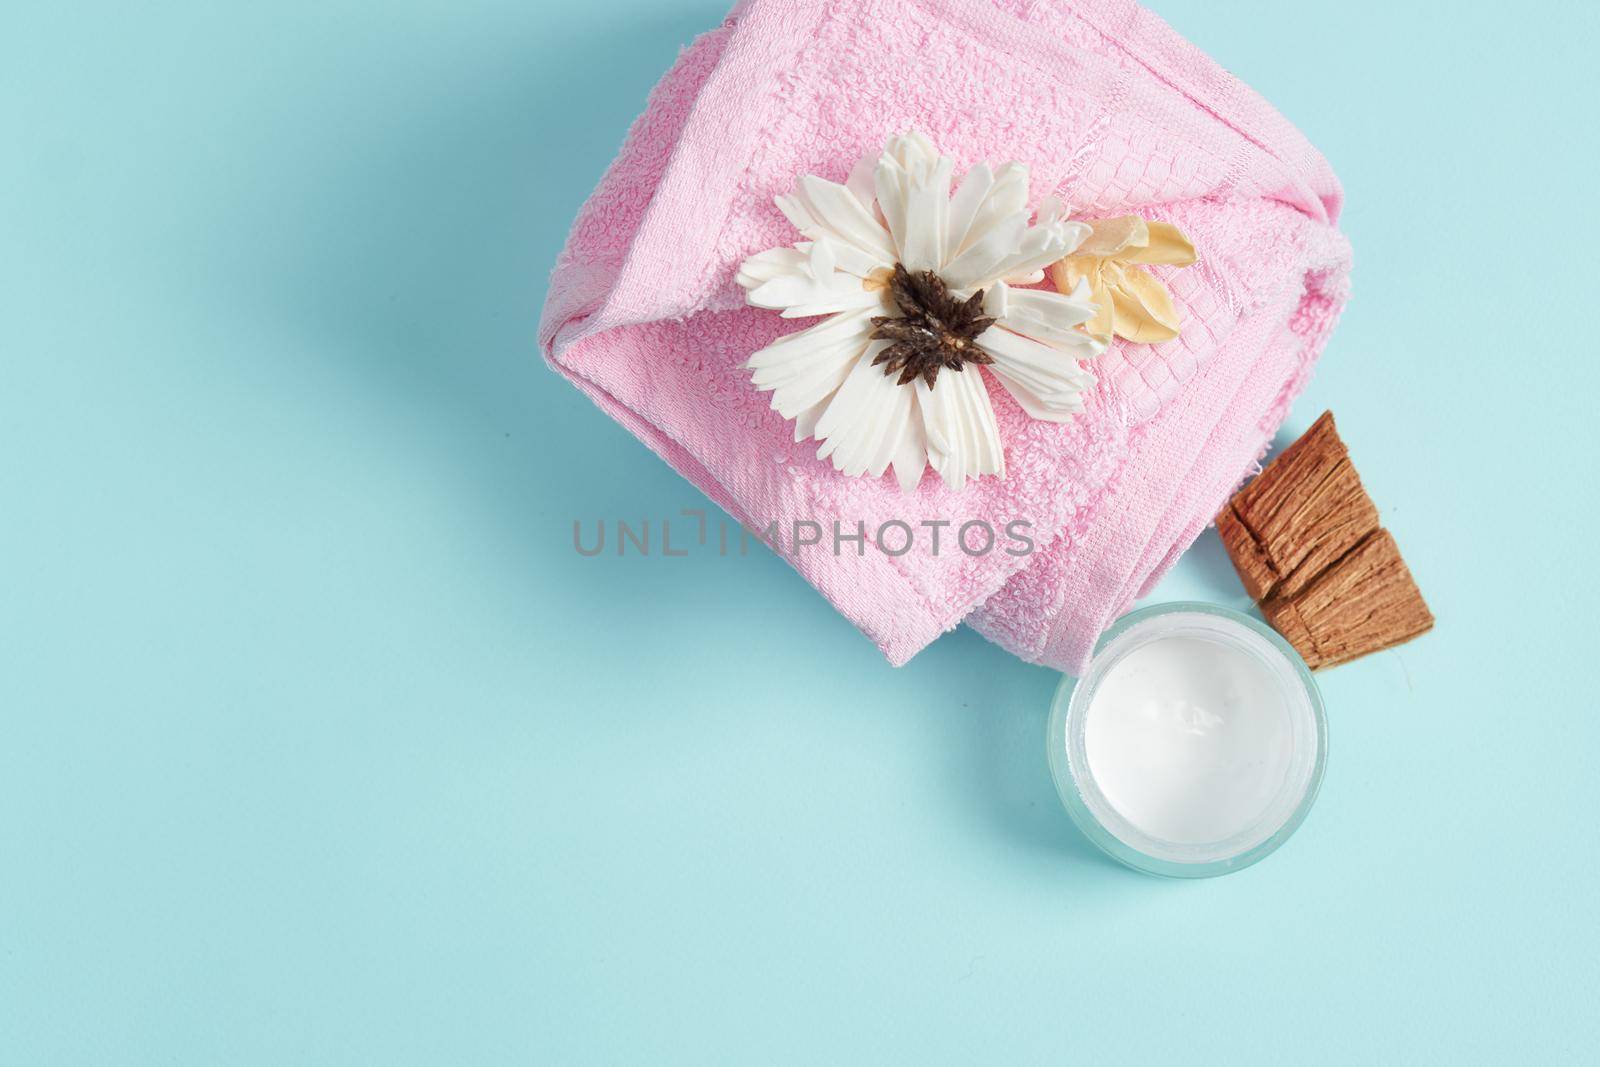 spa products cosmetics health procedures view from above. High quality photo